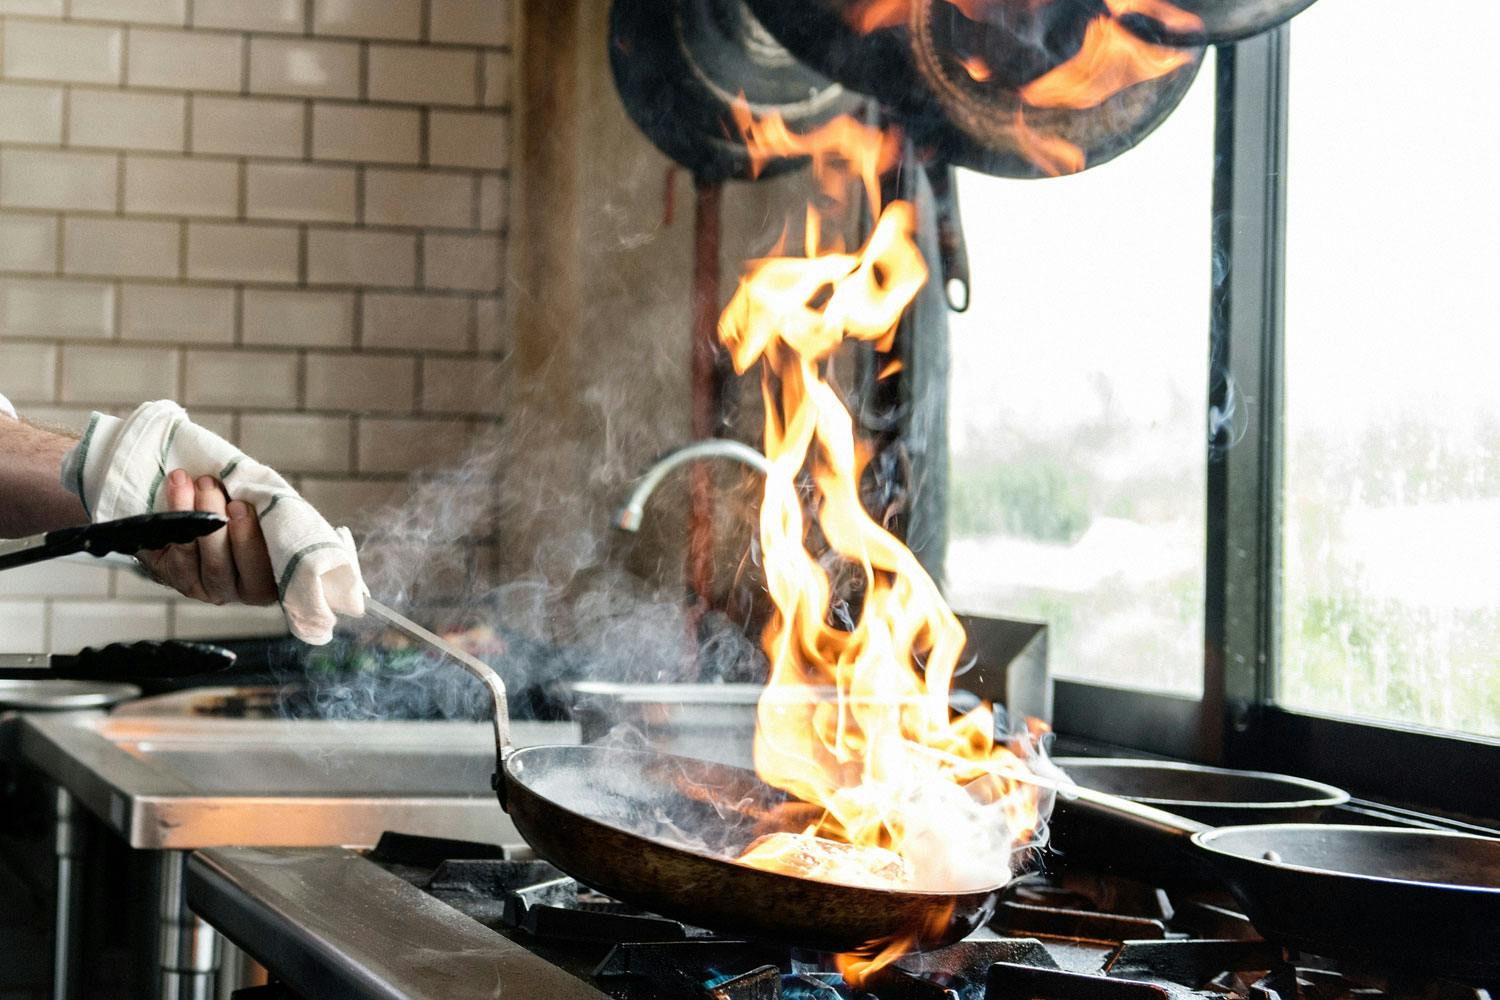 A huge flame rises from a frying pan held above a gas stove inside a restaurant kitchen.